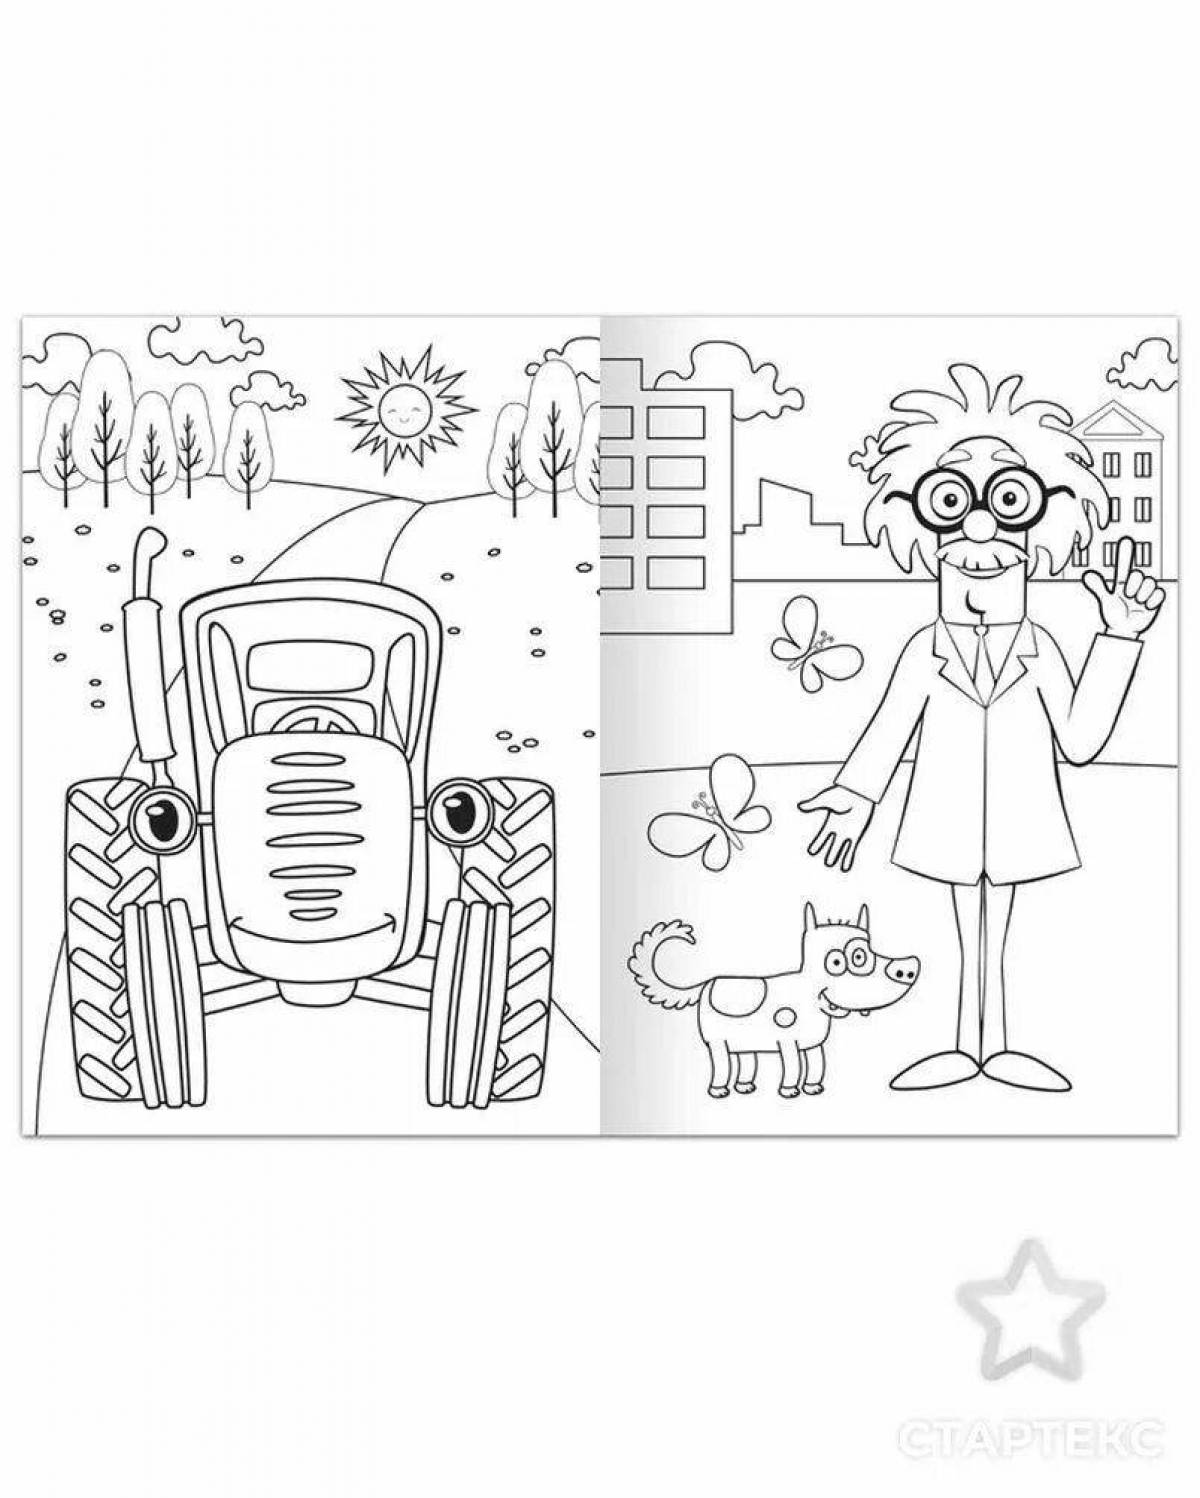 Fabulous blue tractor coloring page